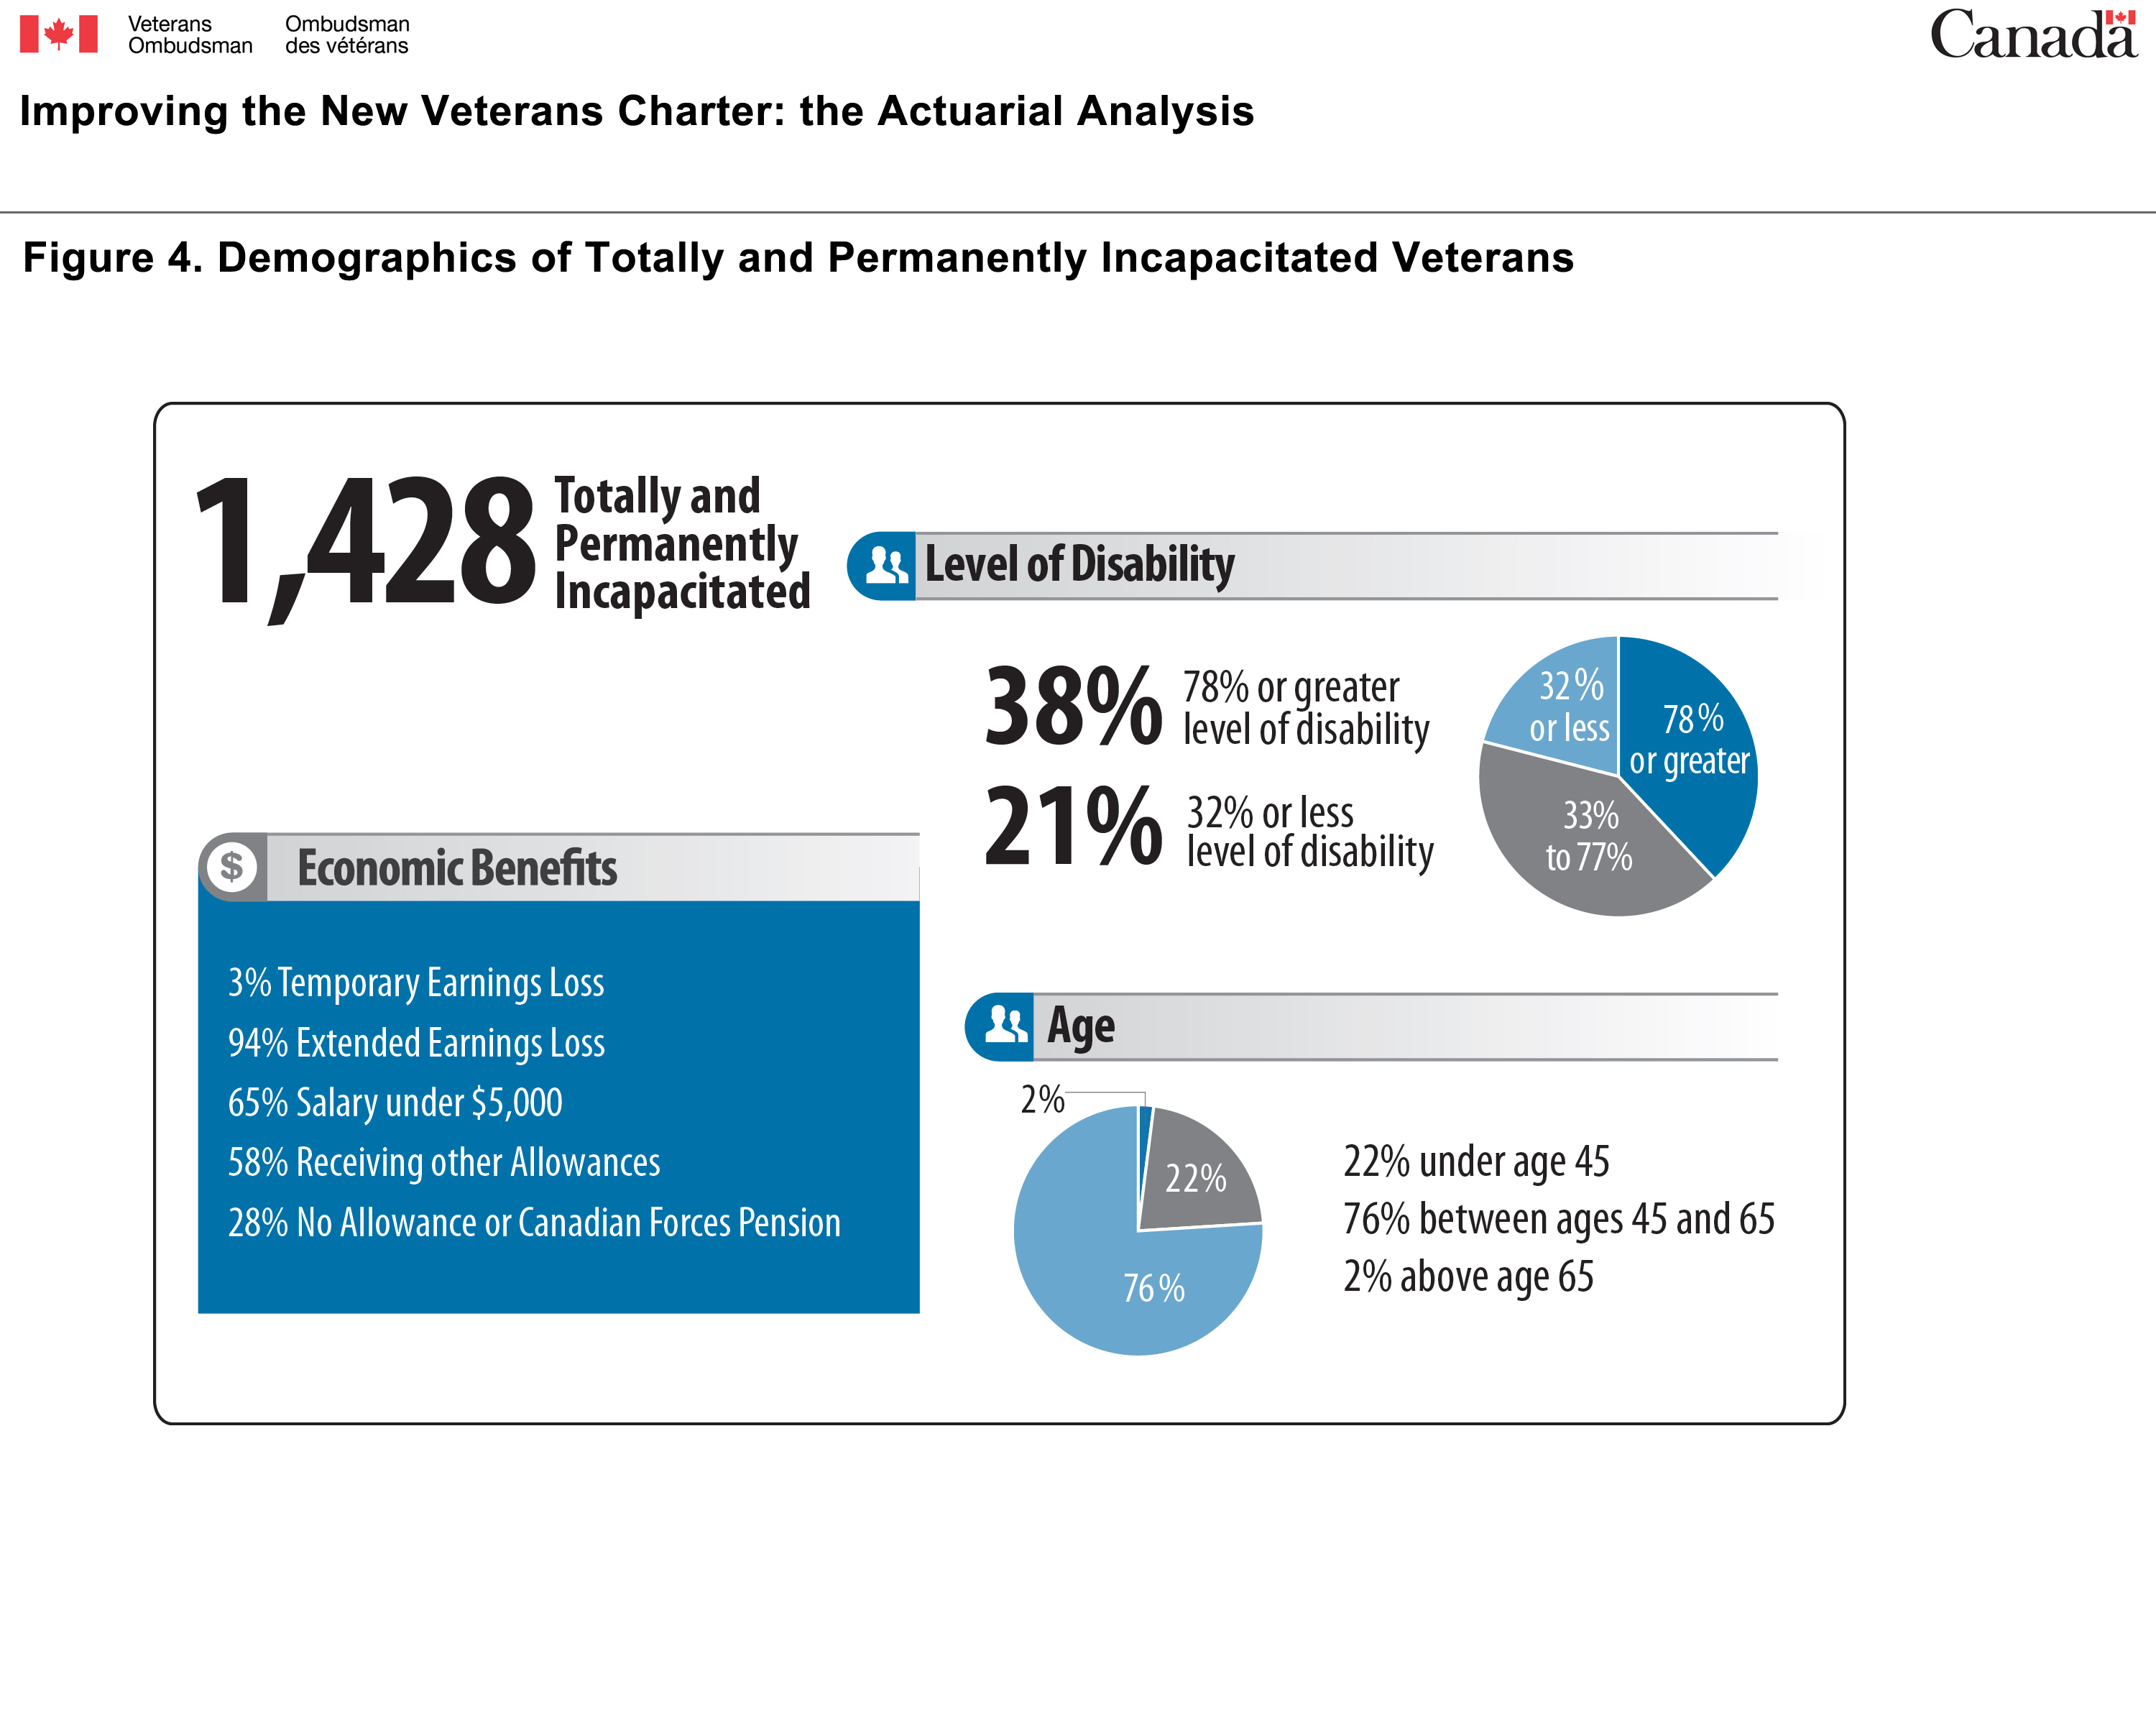 Figure 4. Demographics of Totally and Permanently Incapacitated Veterans